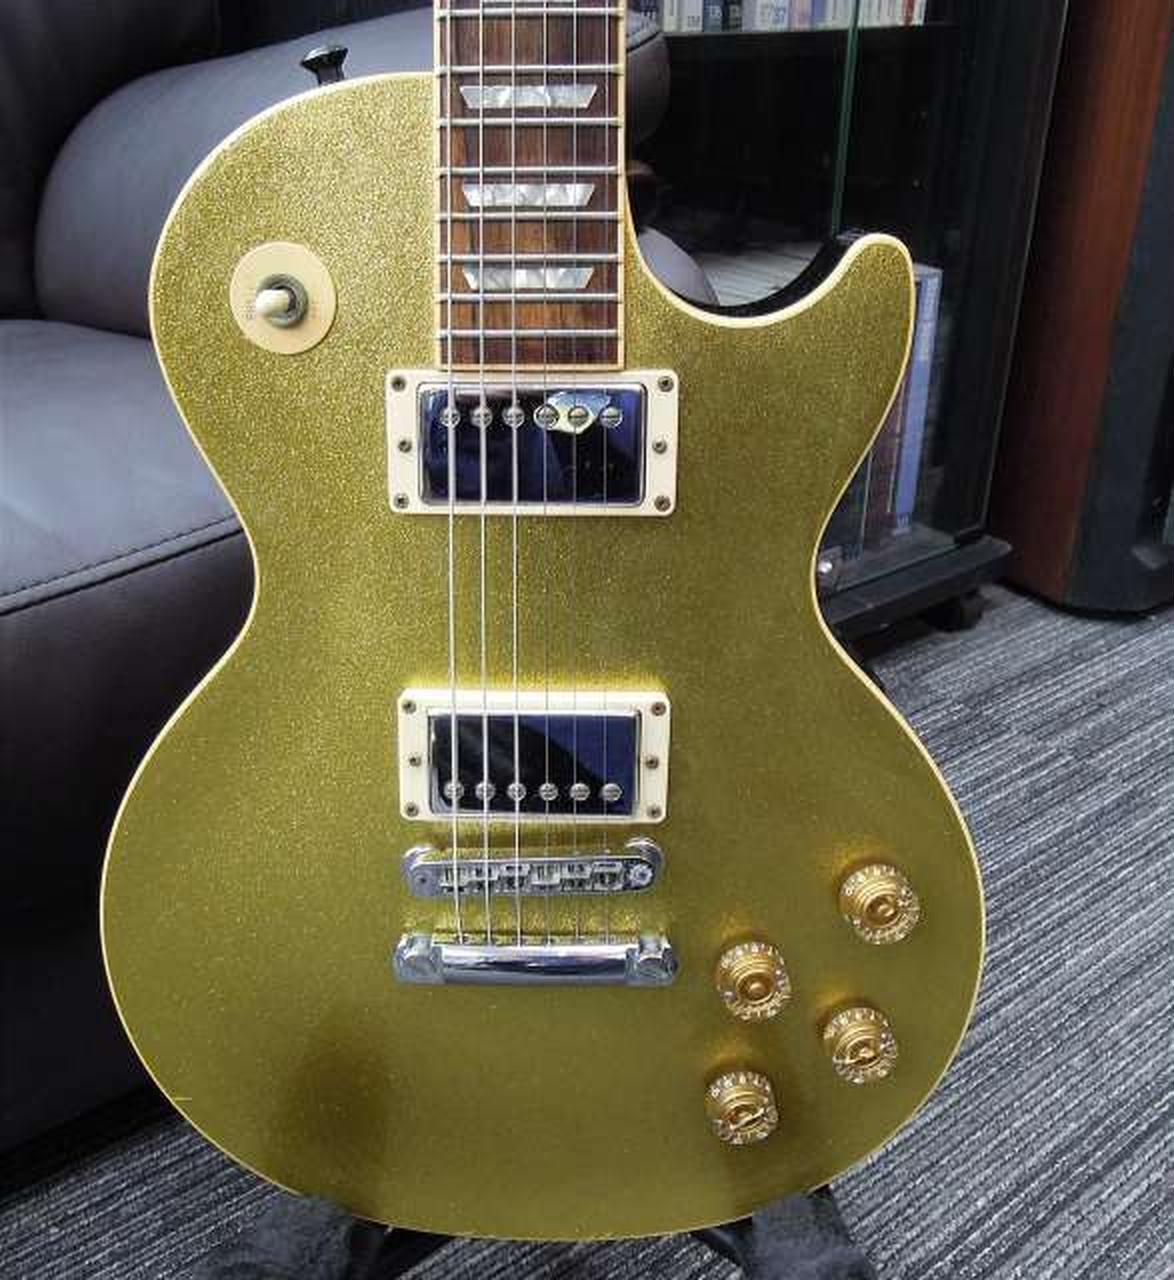 Paul type Model number STD SPARKLE GOLD Electric Guitar as same of the pictures